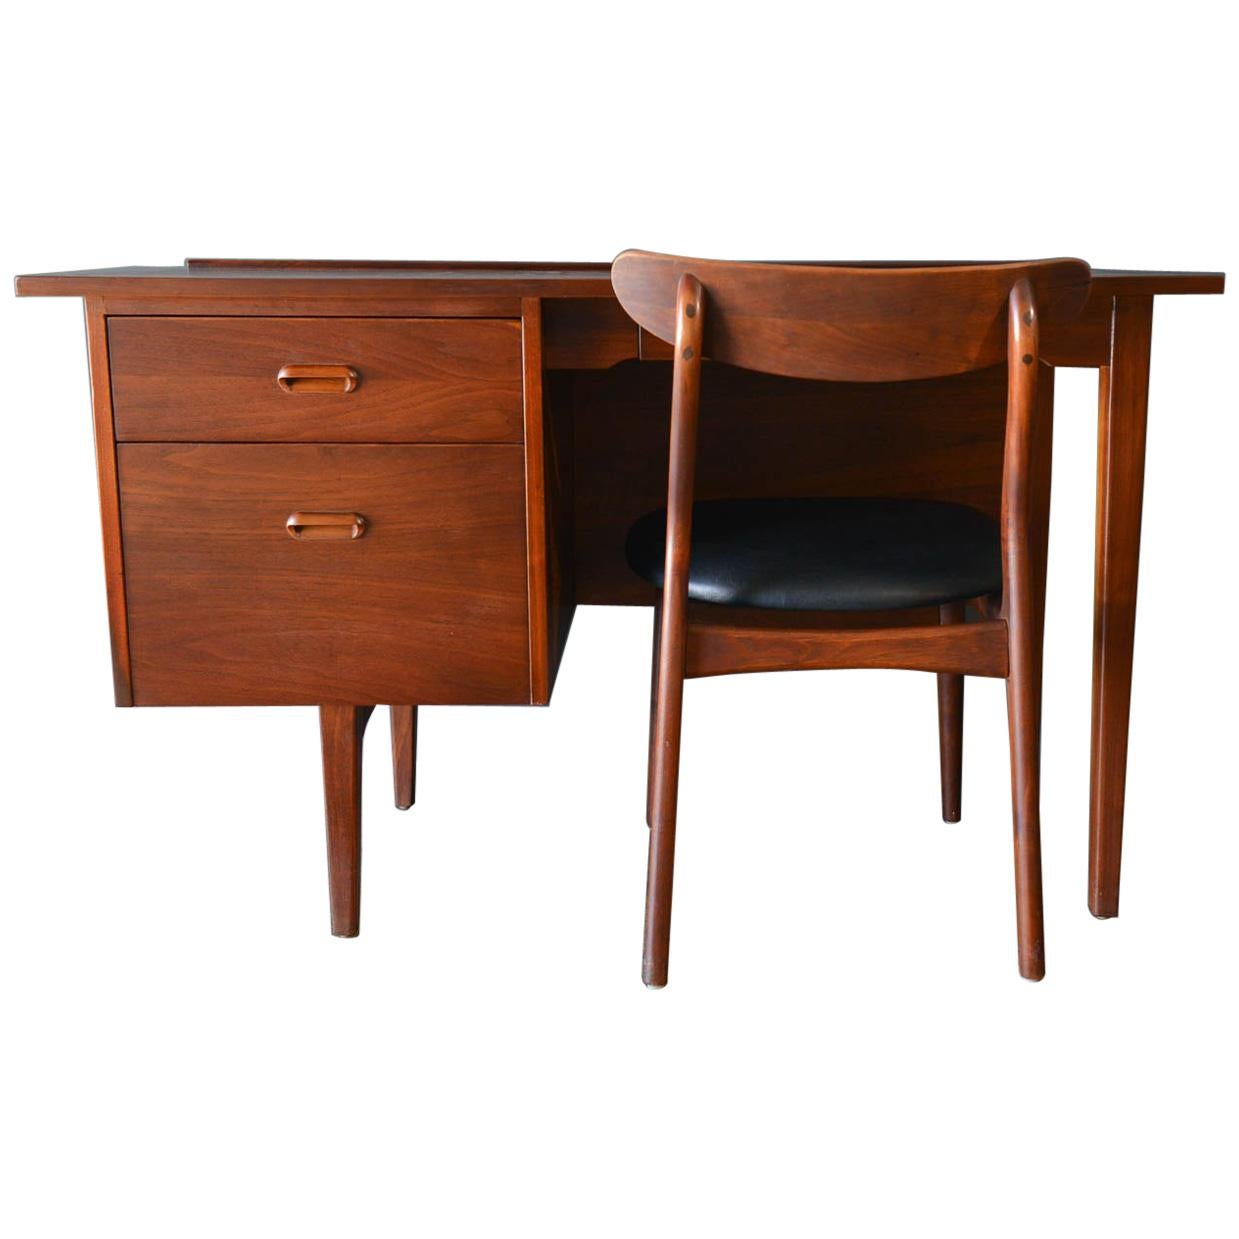 Walnut Desk by Jack Cartwright for Founders, circa 1960